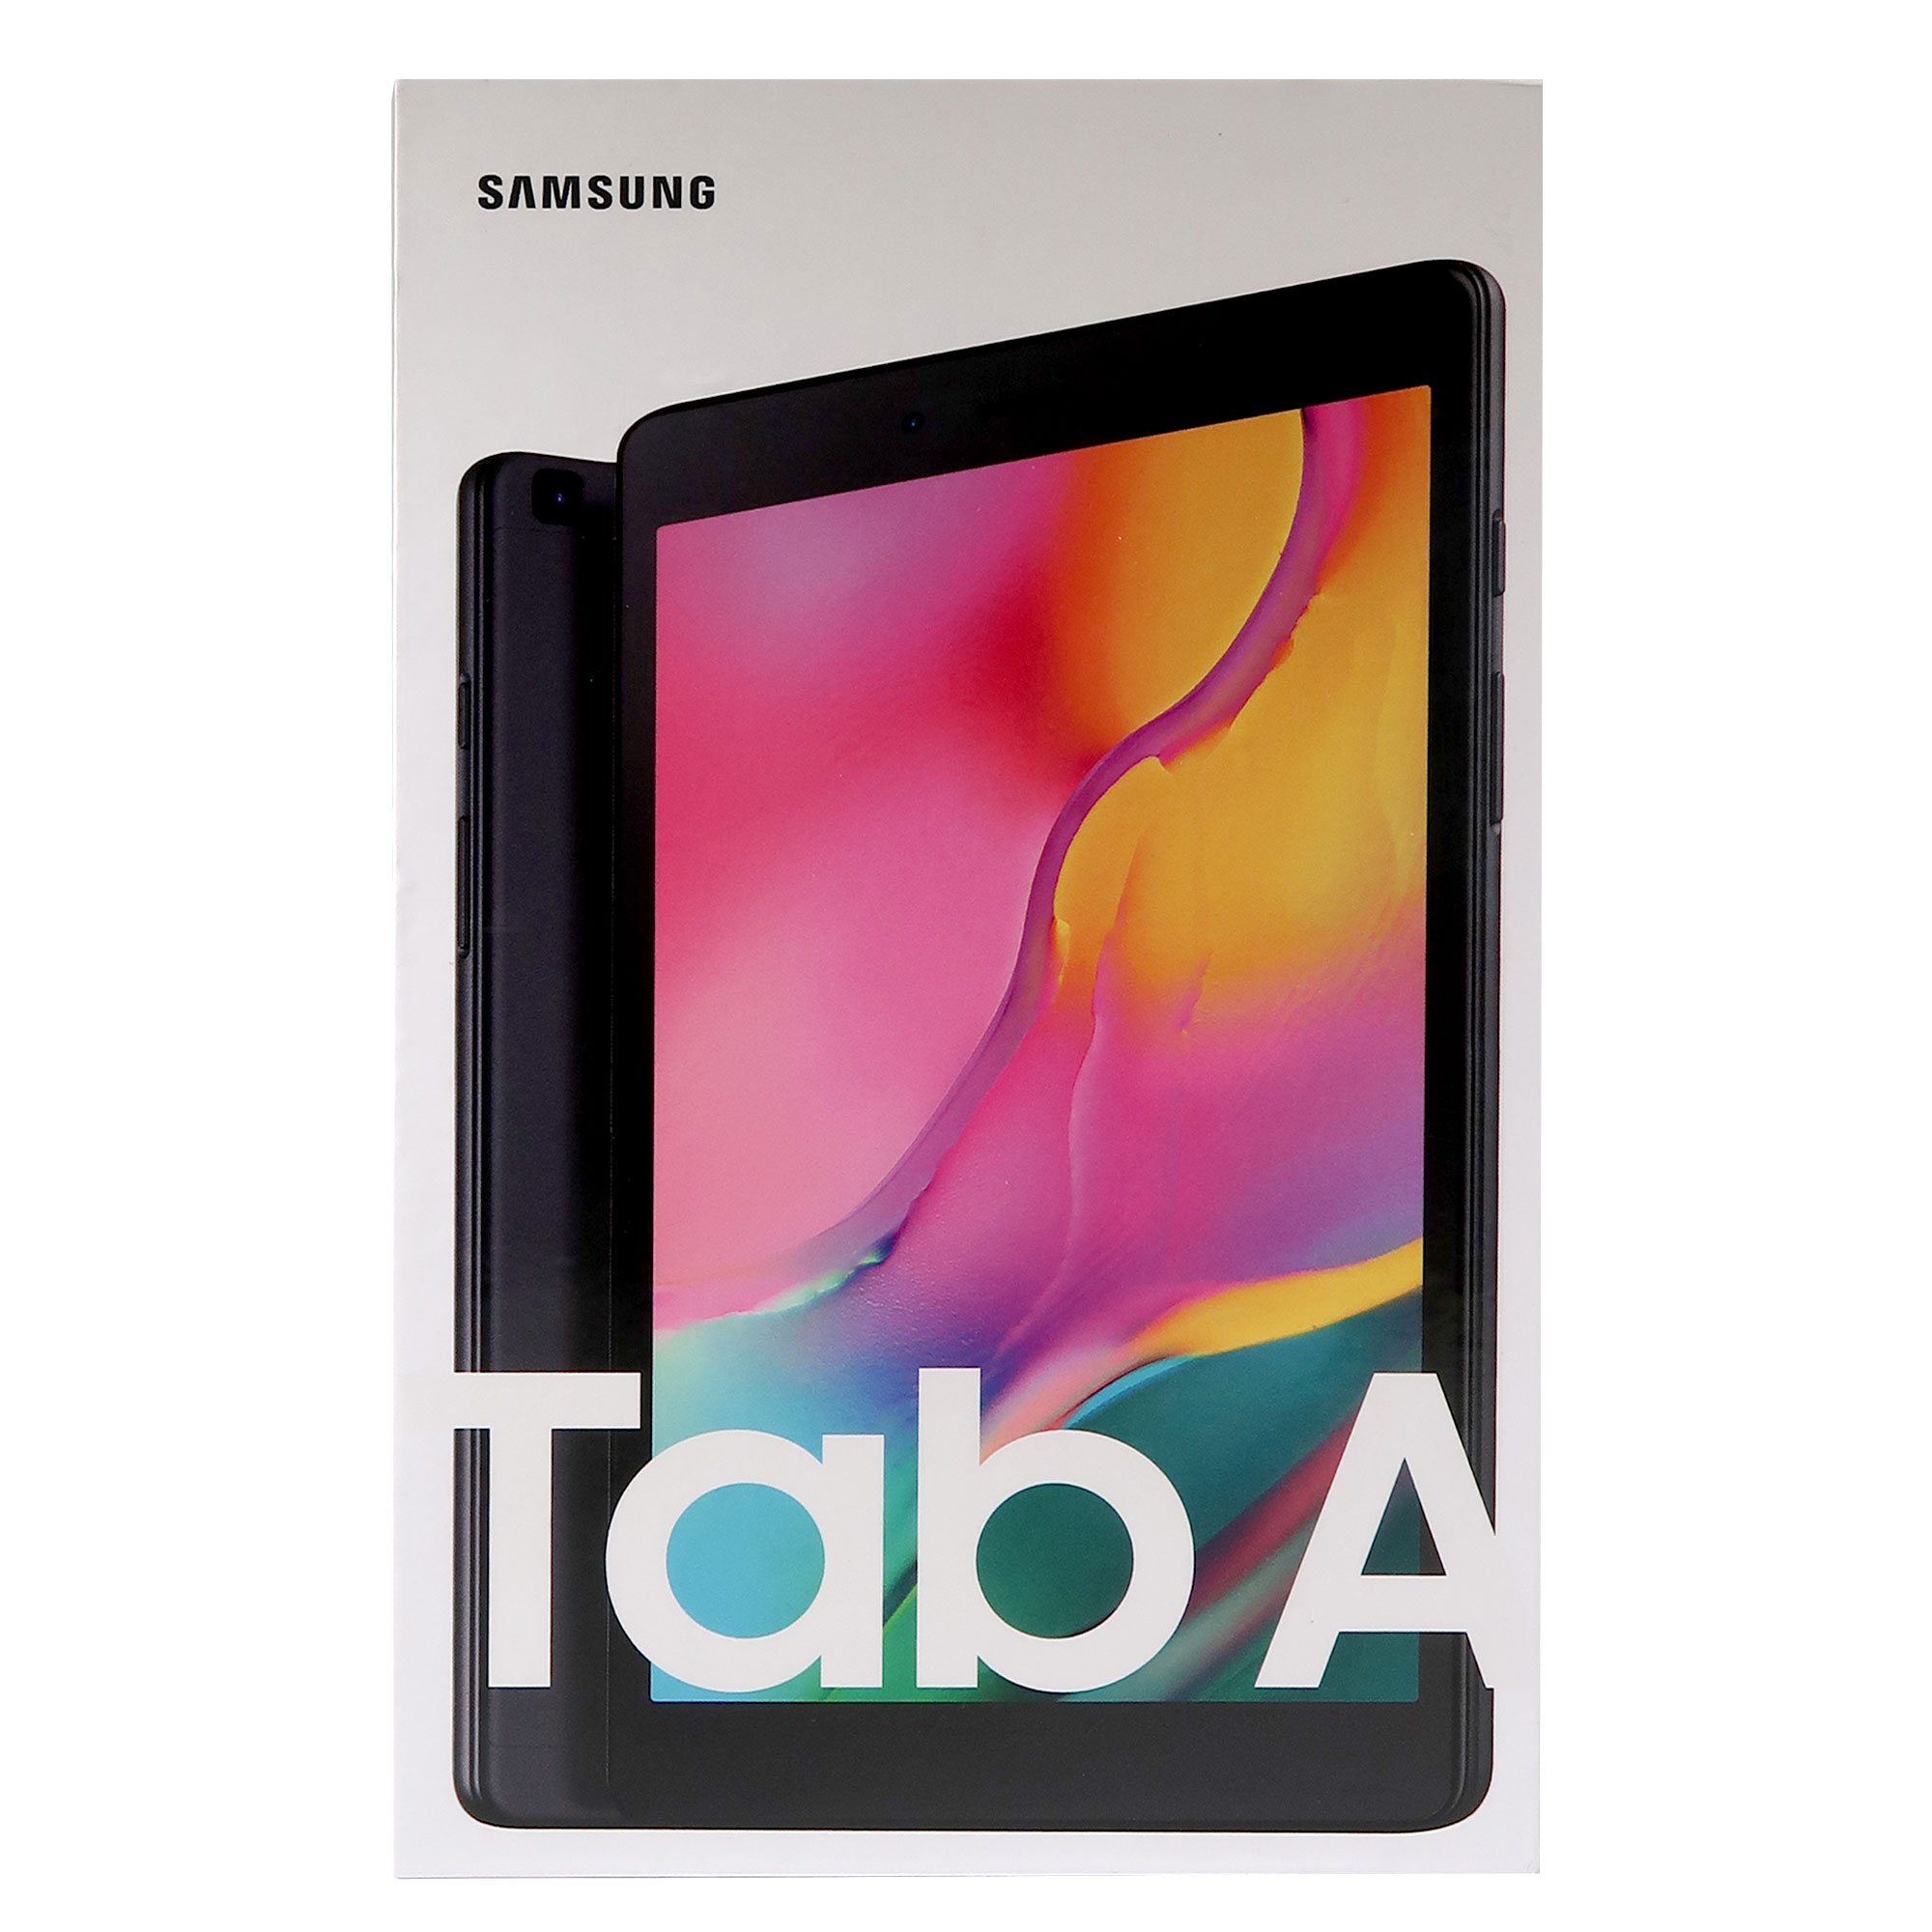 Samsung Galaxy Tab A 8.0" T295 LTE 32GB Tablet with 360 Rotating Tablet Cover Case